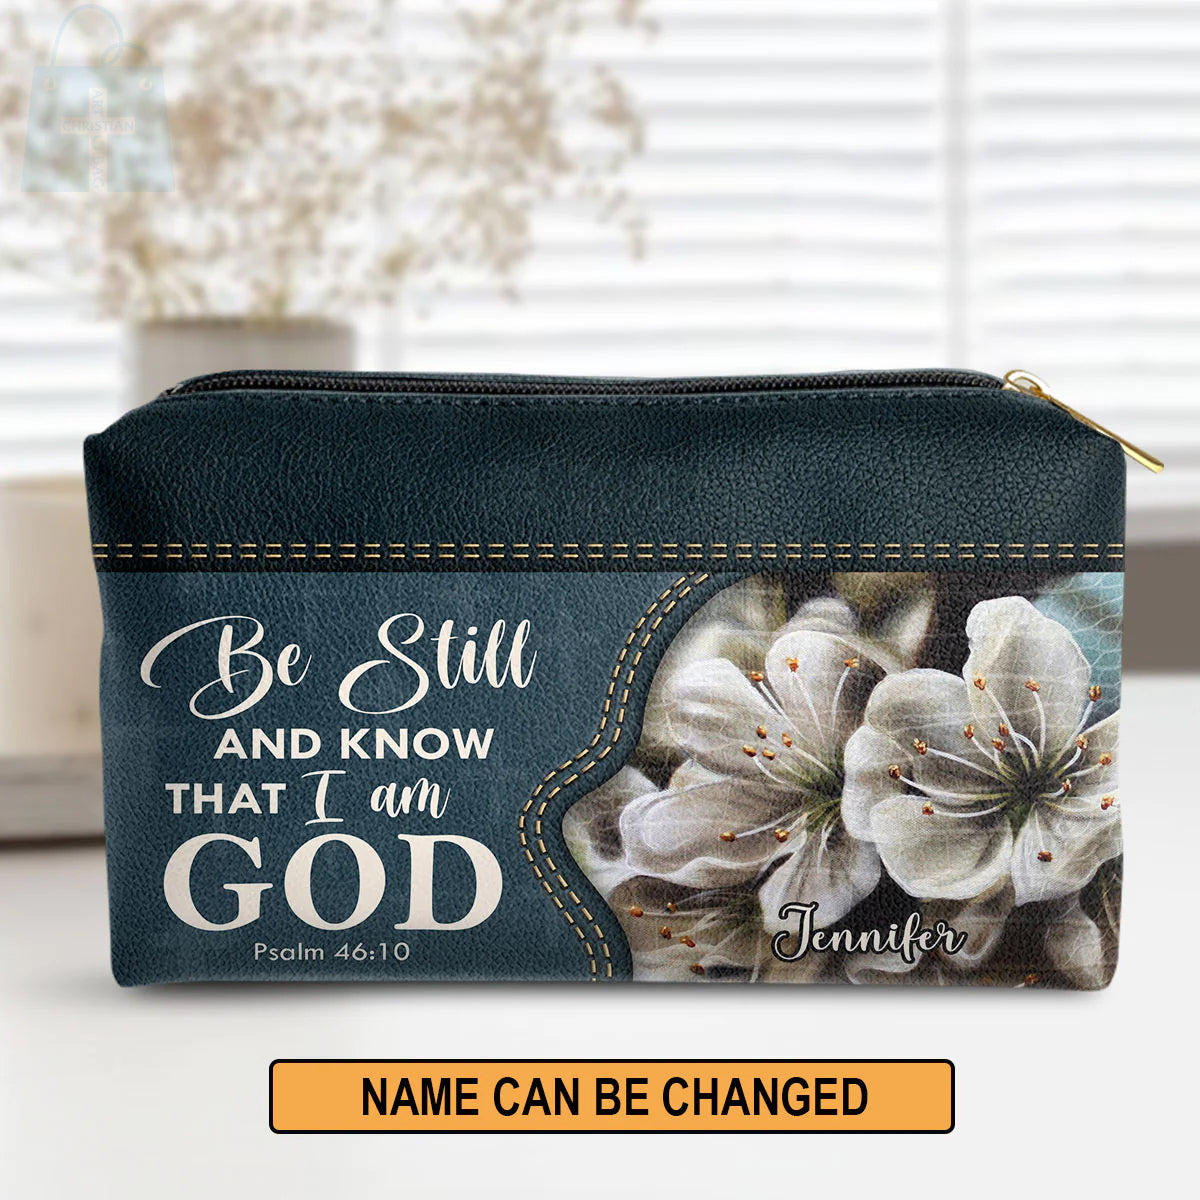 Christianartbag Makeup Cosmetic Bag, Be Still And Know That I Am God, Christmas Gift, Personalized Leather Cosmetic Bag. - Christian Art Bag